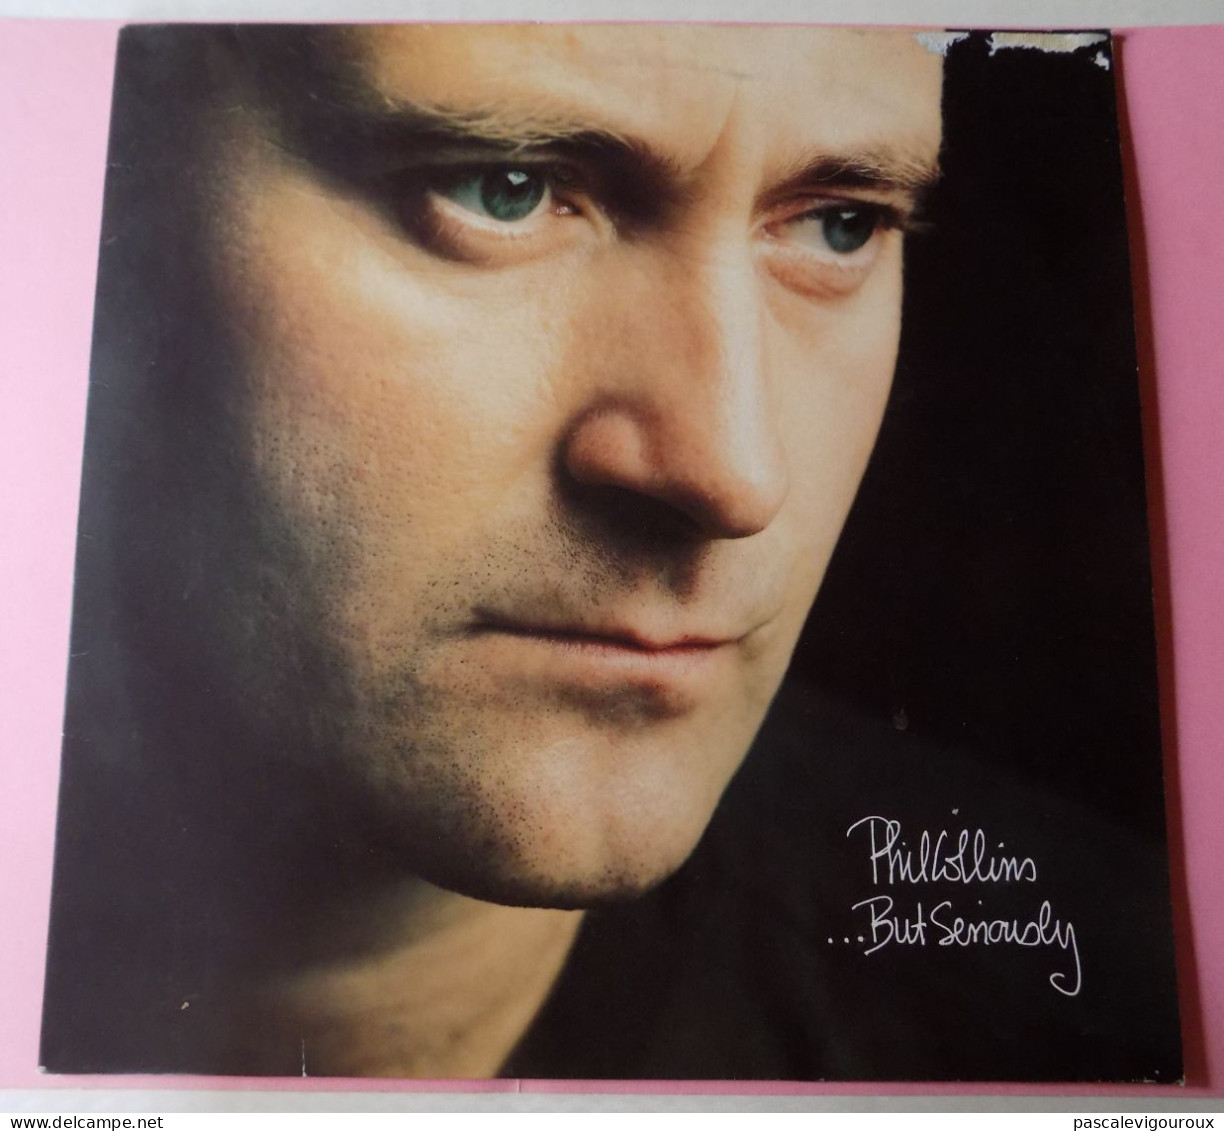 PHIL COLLINS / BUT SERIOUSLY / VINYLE STEREO LP 33T / 1989 / WEA INTERNATIONAL - Other - English Music